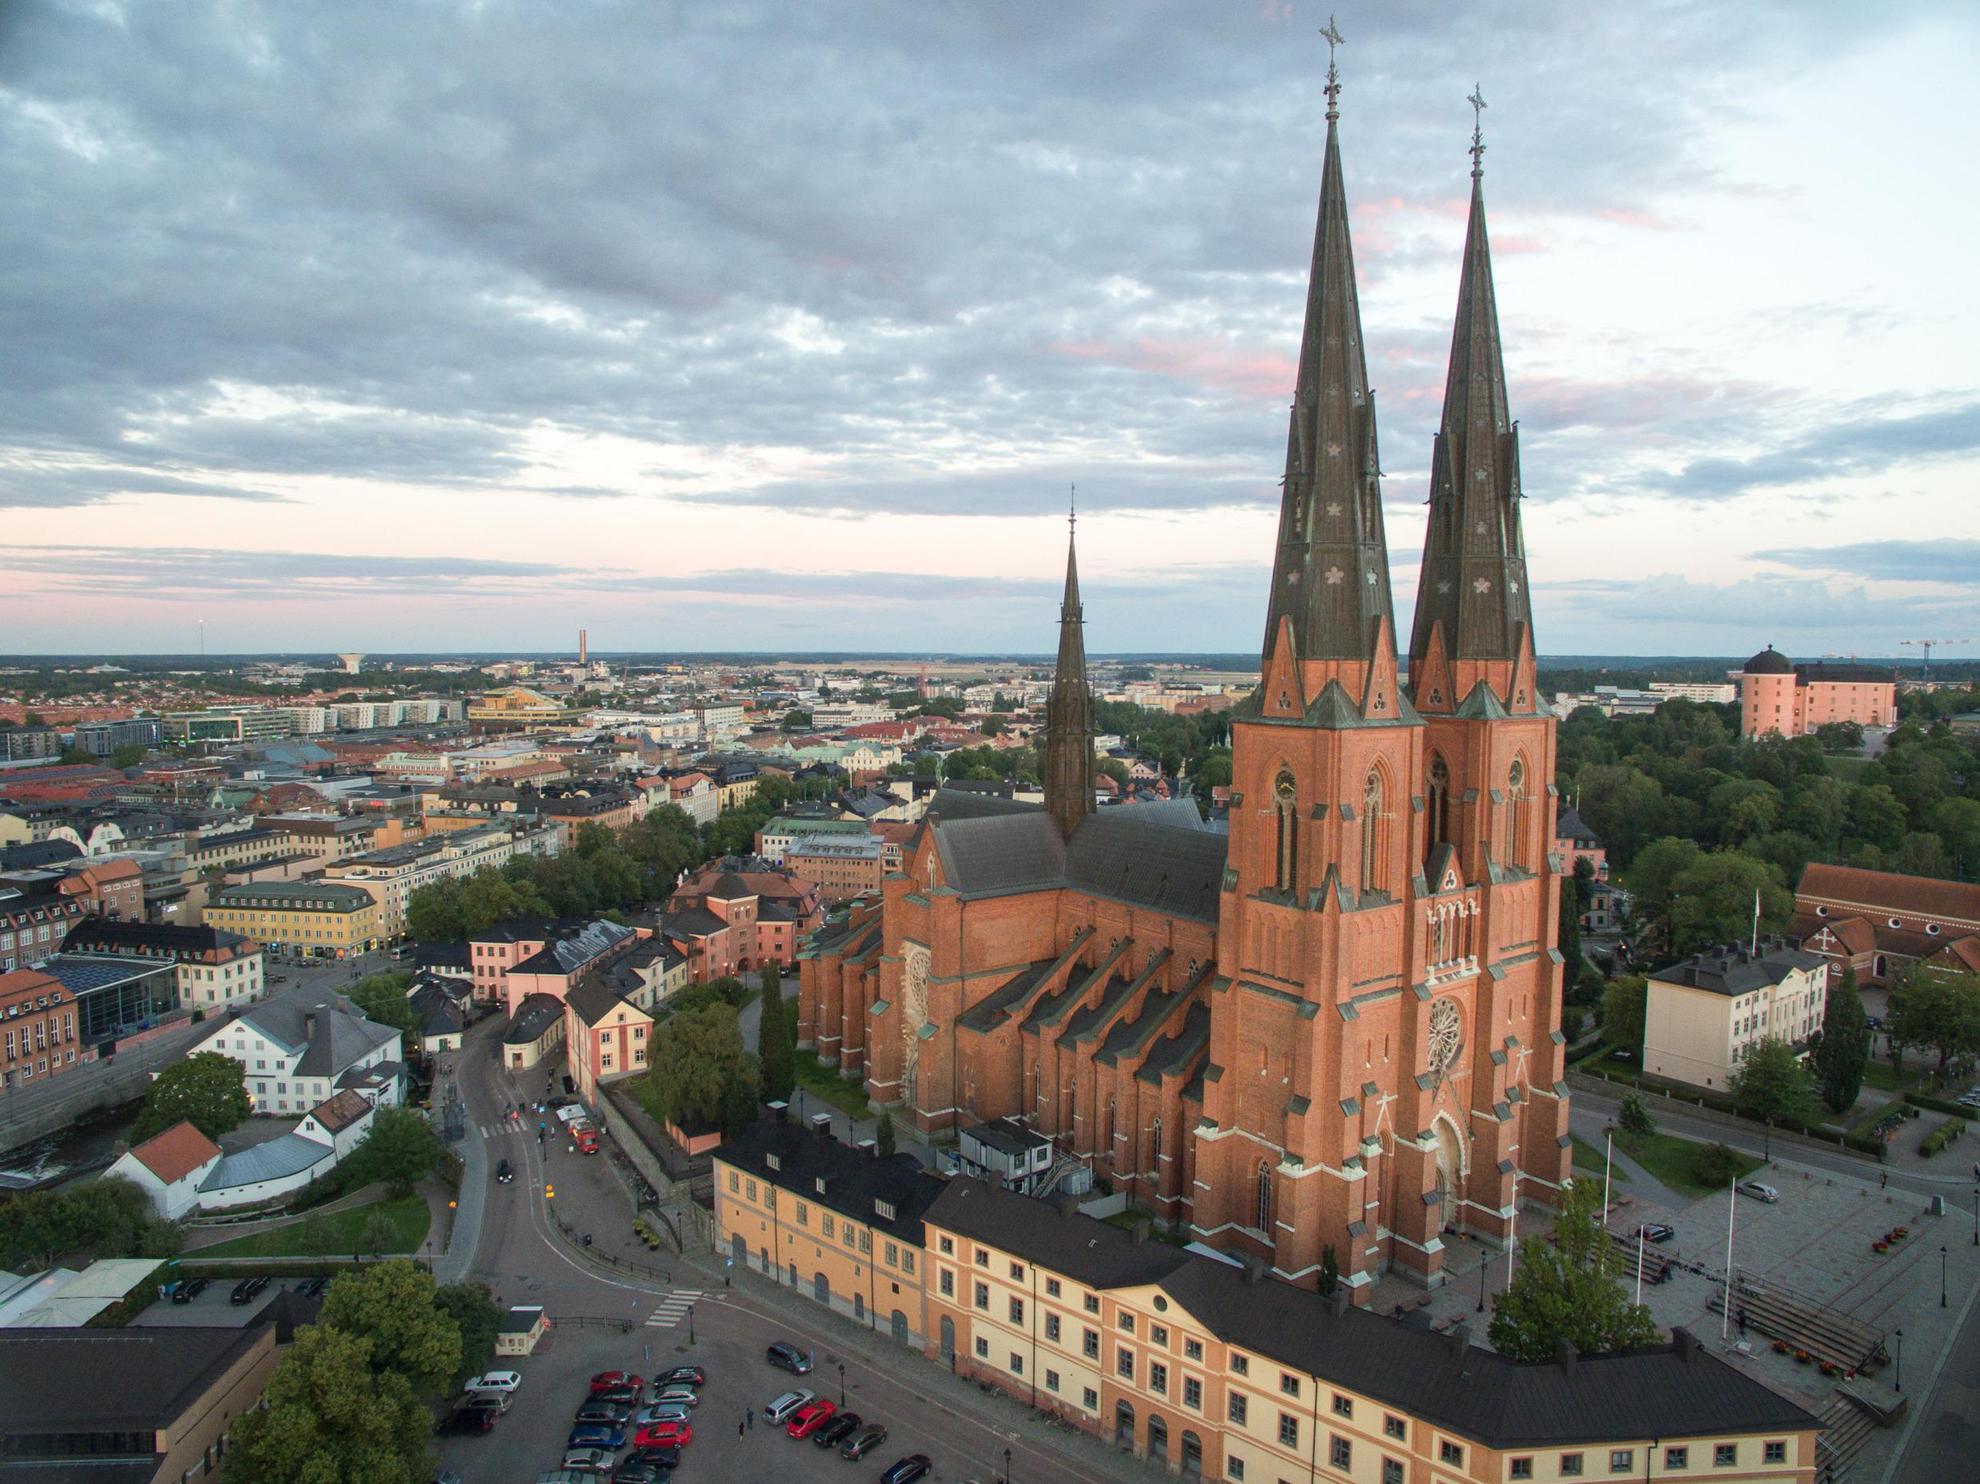 Uppsala Cathedral and the city seen from above.